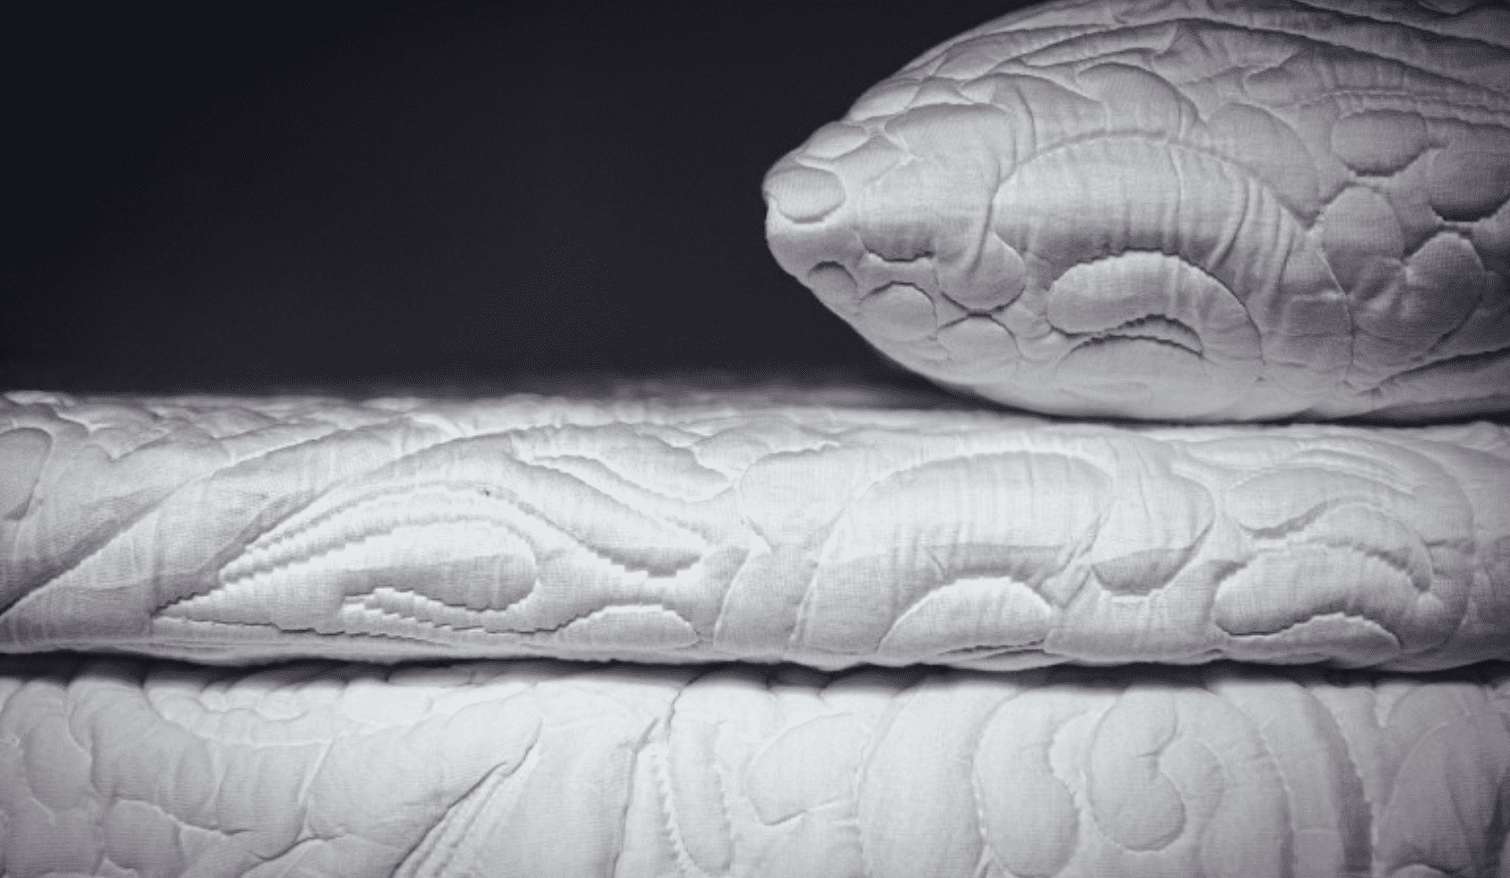 white cot mattress topper from the vermont store